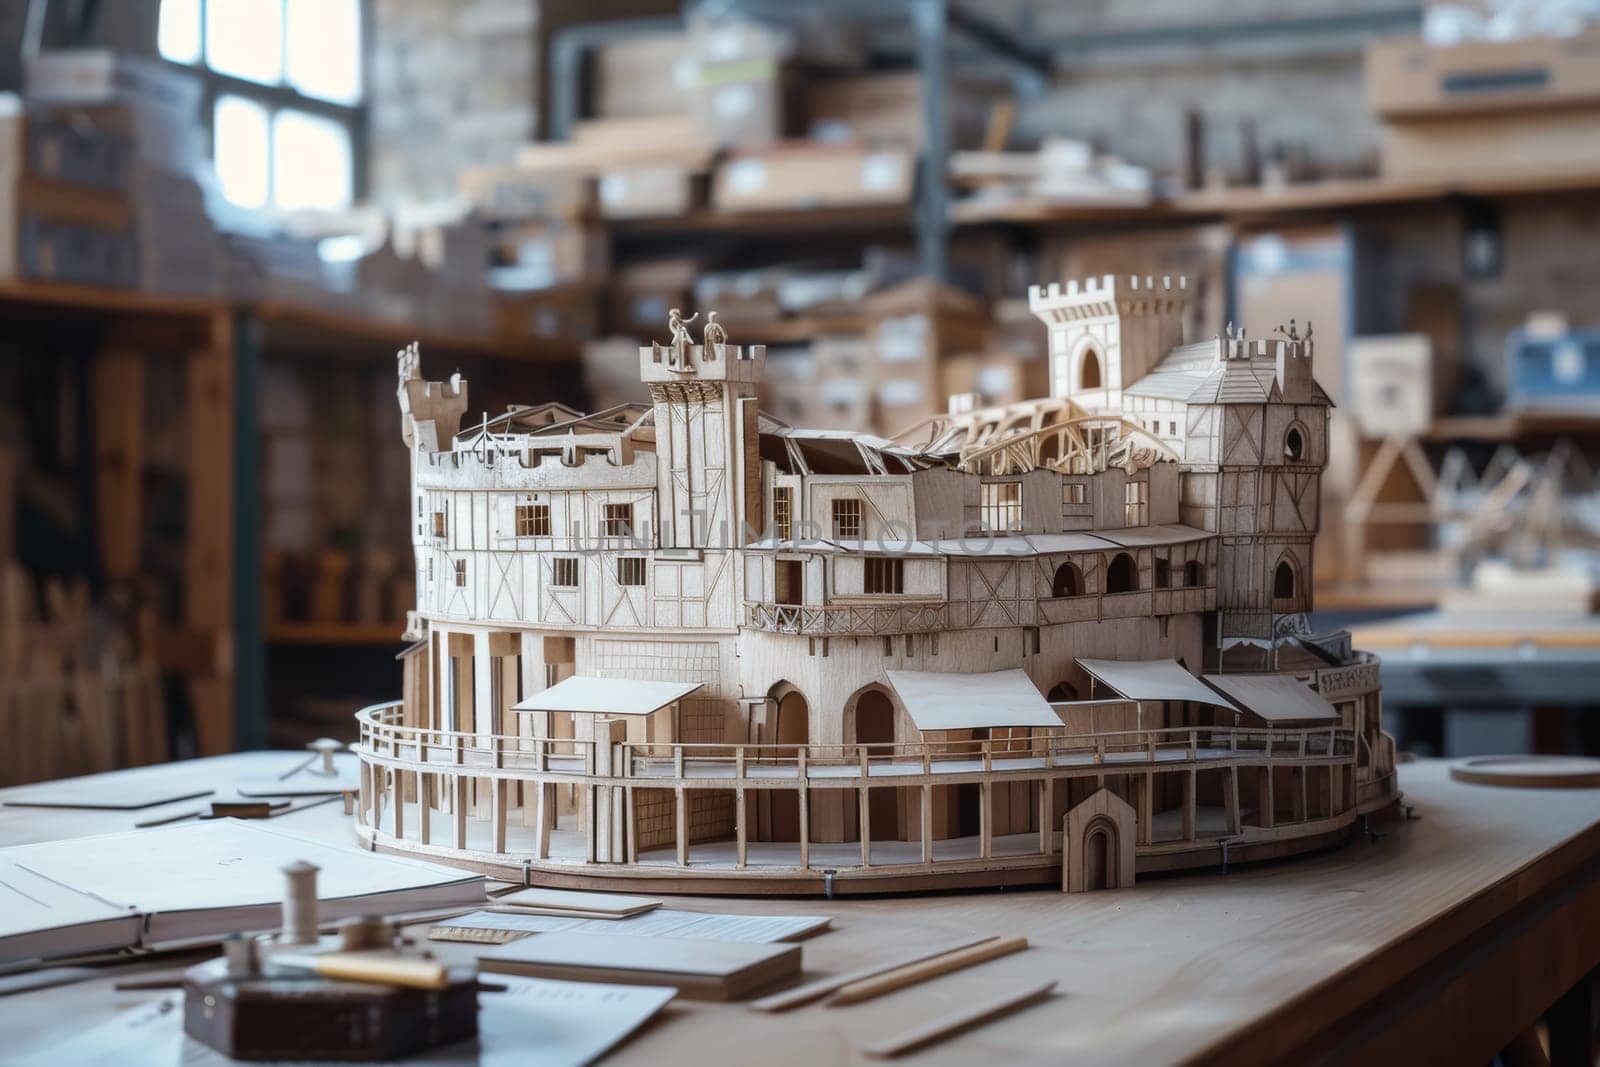 An intricately detailed wooden model of the historic Globe Theater, representing Shakespearean architecture and Elizabethan playhouses